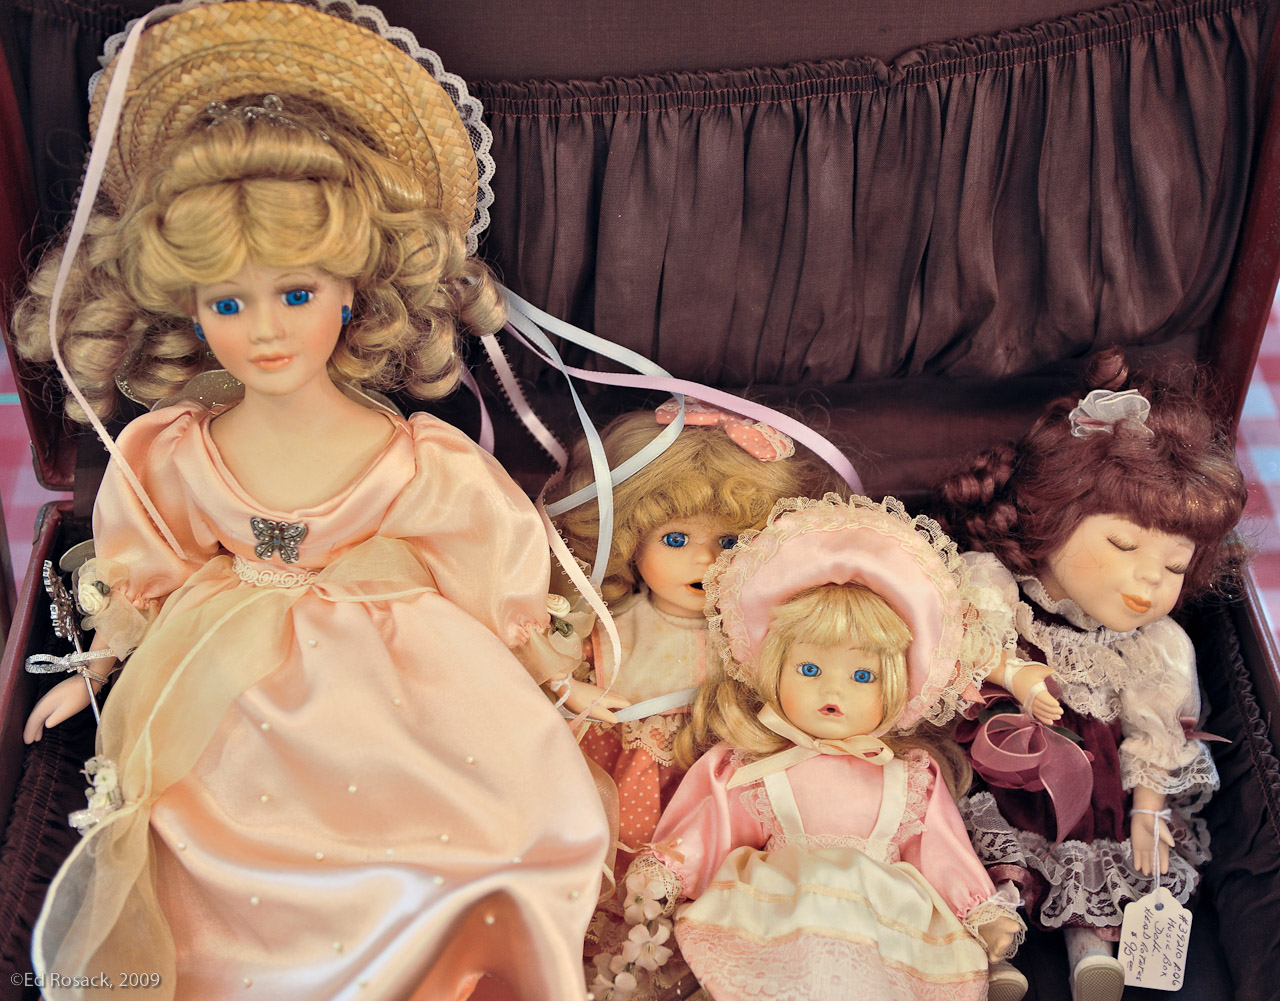 Suitcase dolls- I made this photograph in an antique store at the Mt. Dora antique mall.